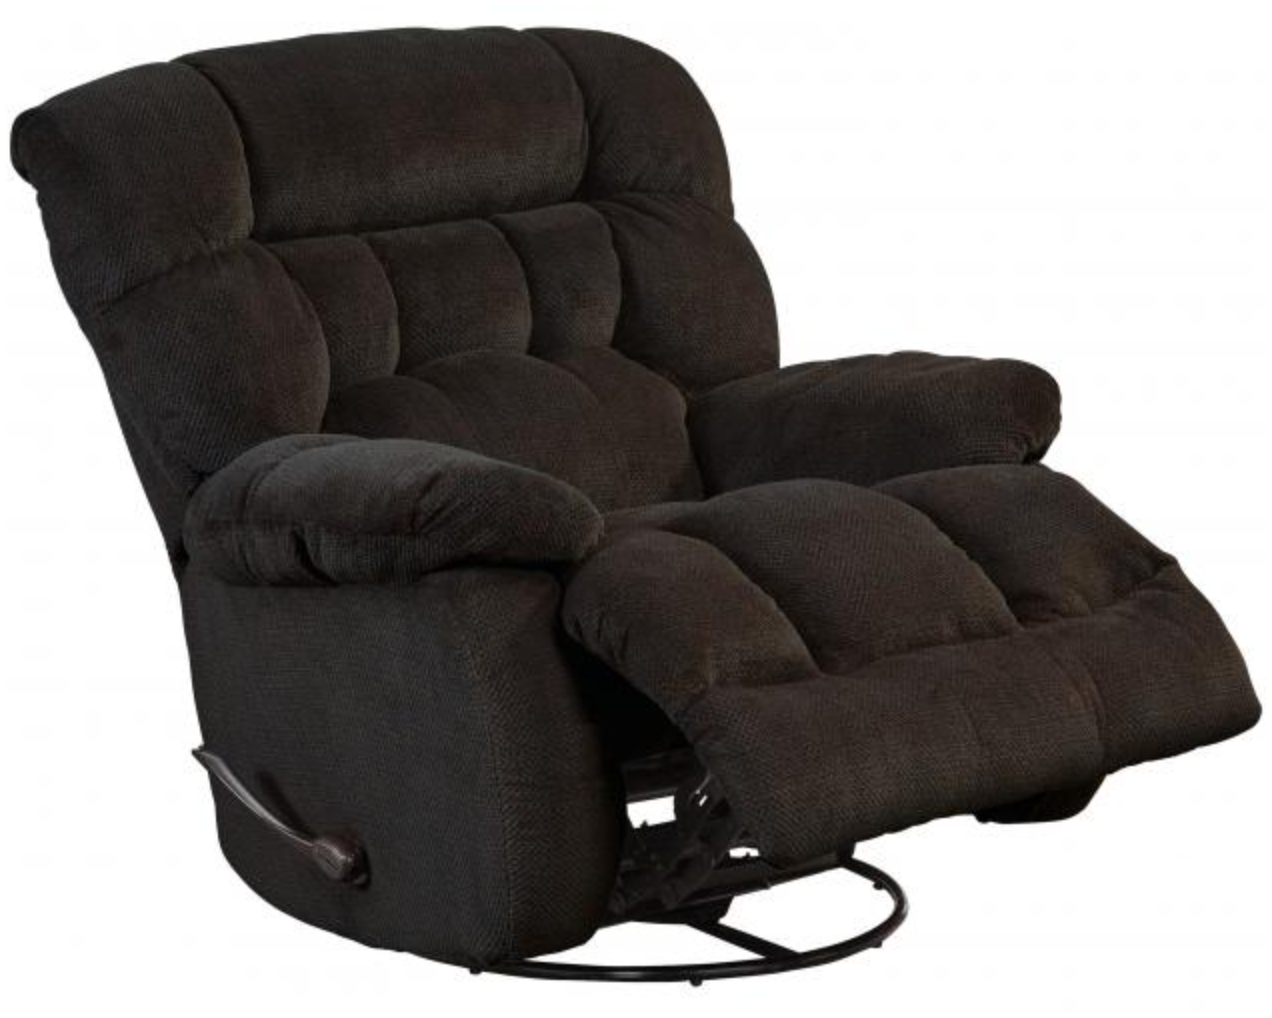 WEEKLY or MONTHLY. Daly's Comfort Chateau Swivel Glider Recliner